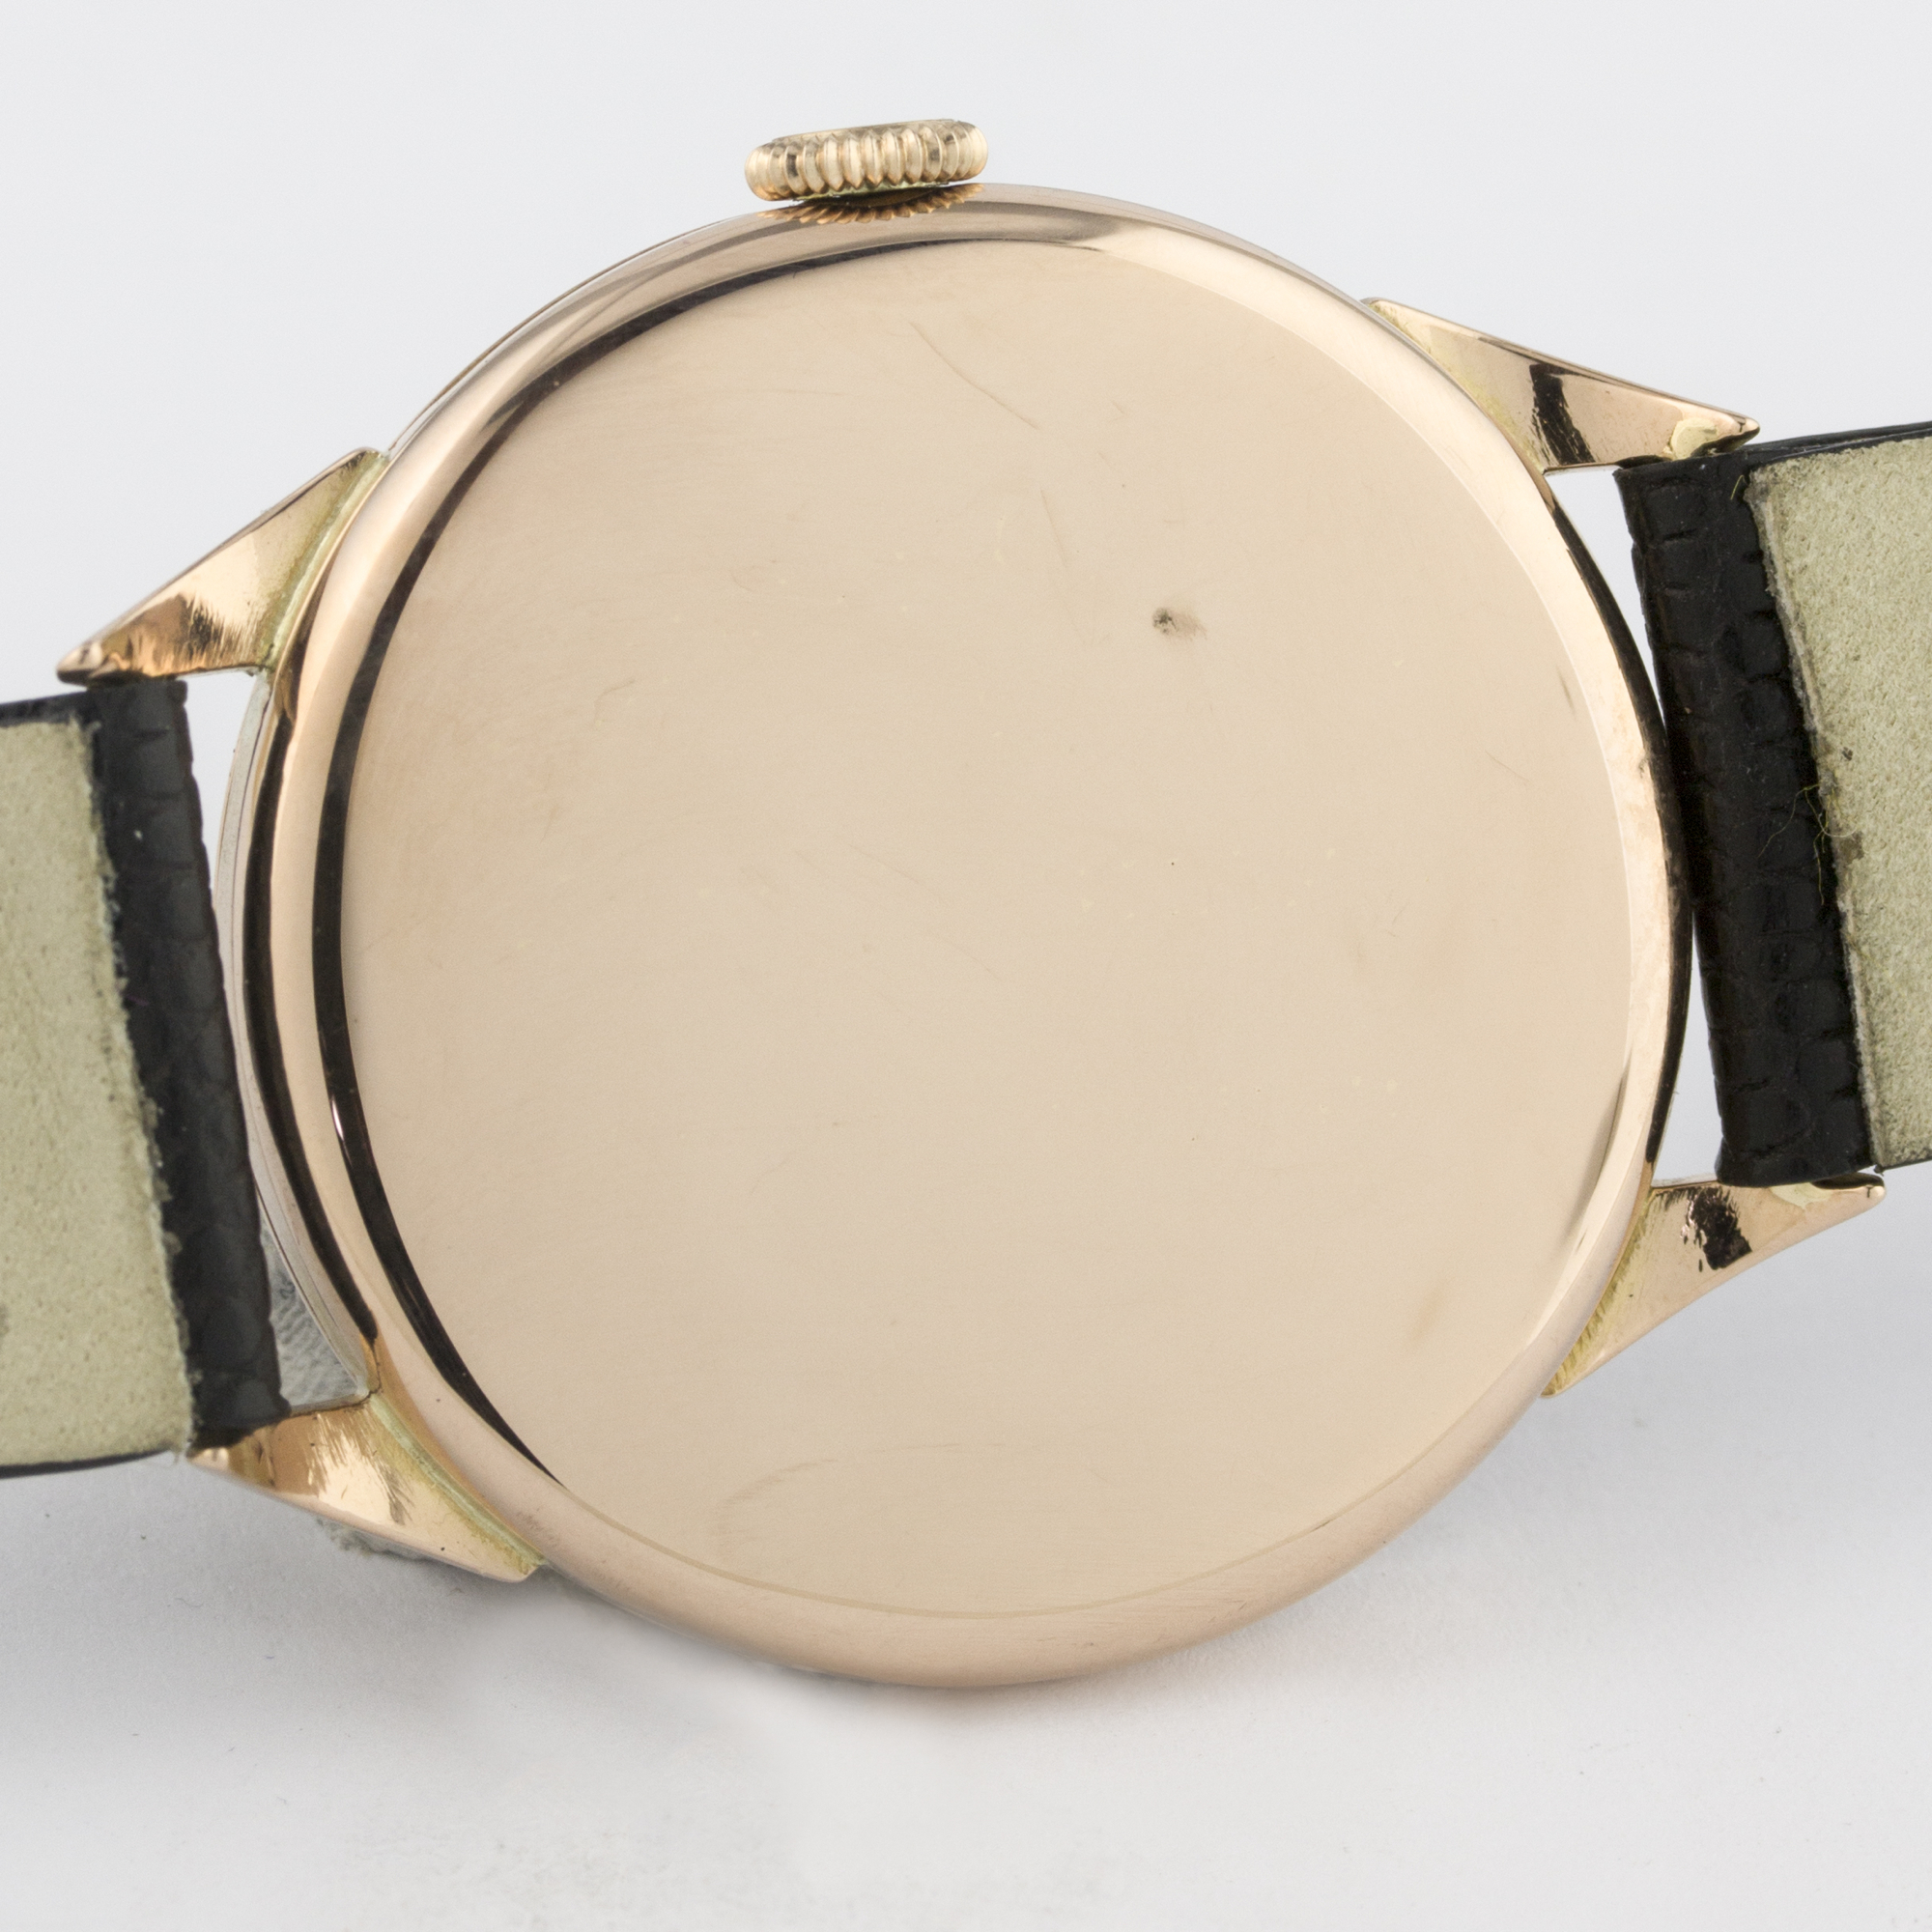 A GENTLEMAN'S LARGE SIZE 18K SOLID PINK GOLD OMEGA WRIST WATCH CIRCA 1950s, REF. 2619 D: Gloss black - Image 5 of 7